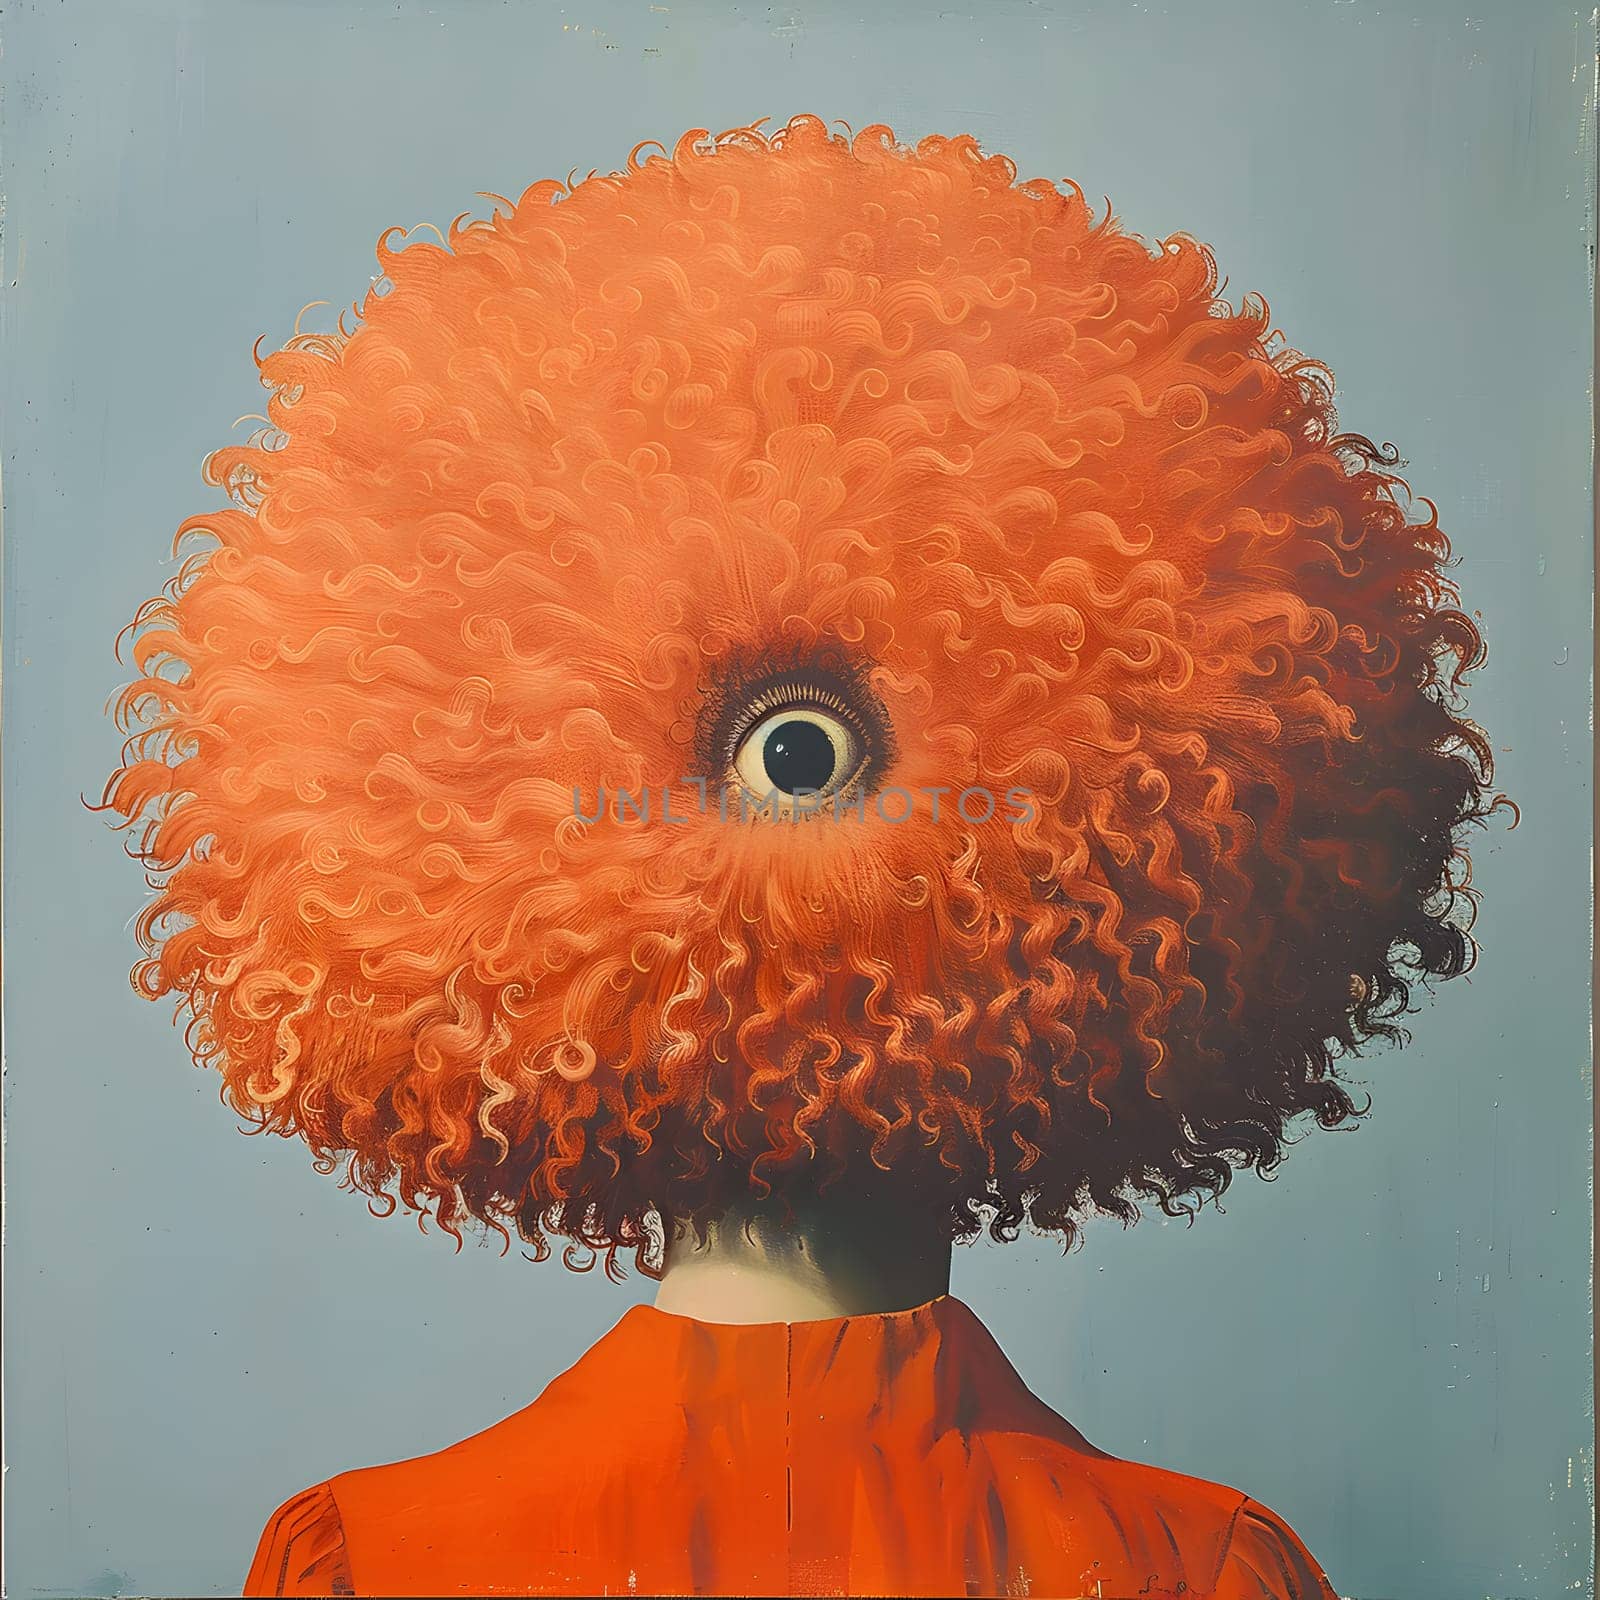 An art piece depicting a person wearing a large orange wig surrounded by flowering plants and plush toys, creating a whimsical and colorful scene